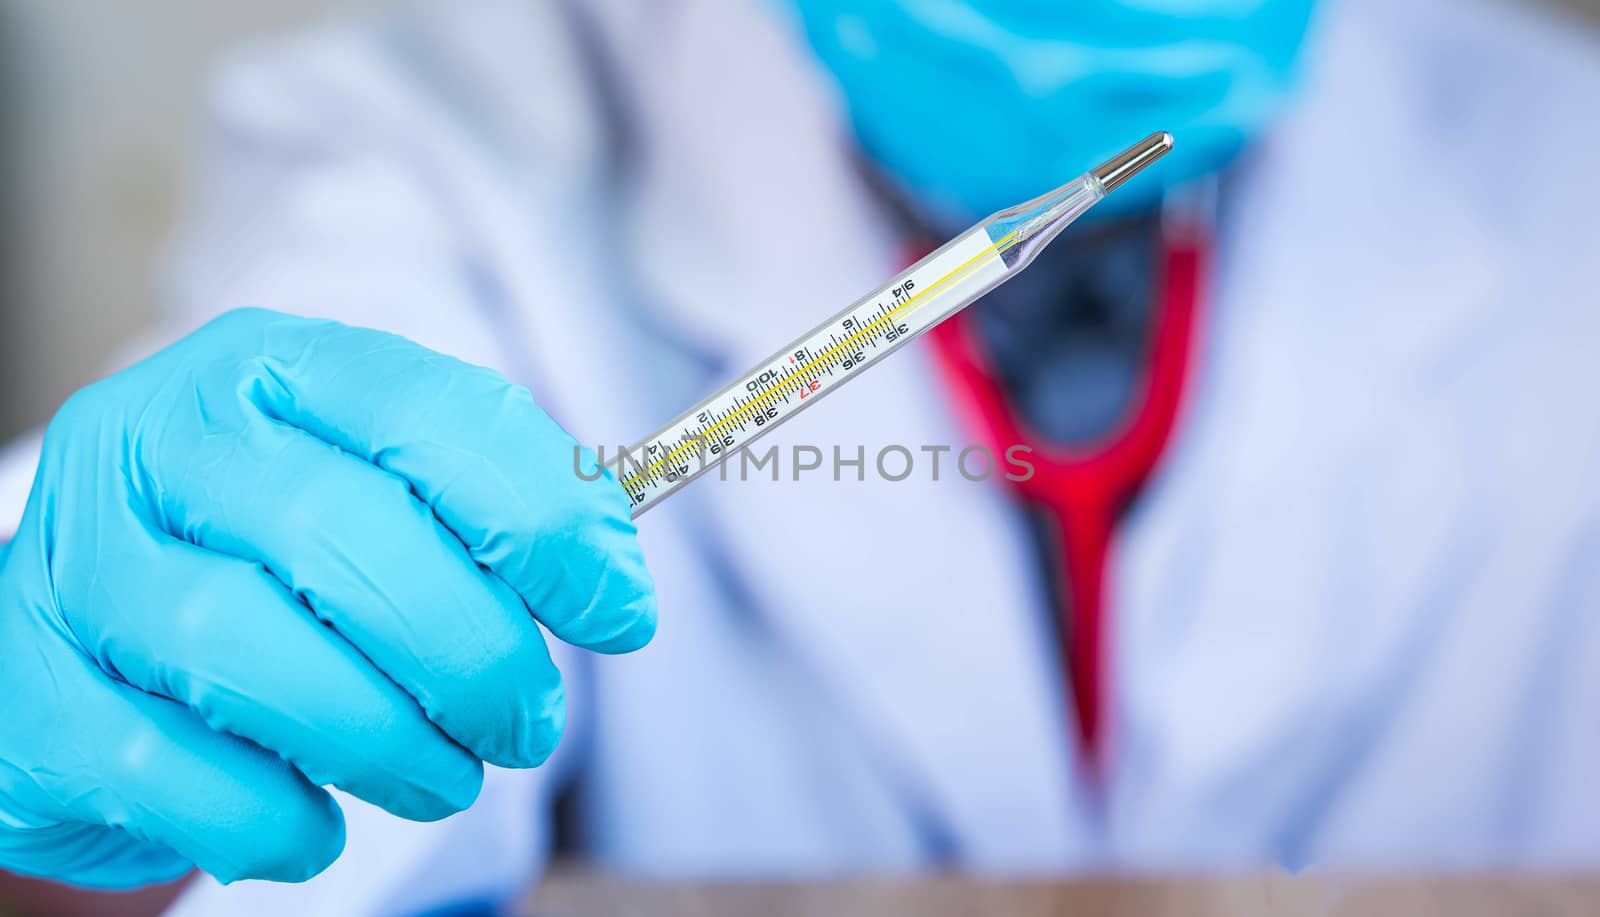 The doctor's hand is holding mercury to measure fever. To measure fever for patients in hospitals or clinics during the viral outbreak surveillance infected or infectious concept with blur background